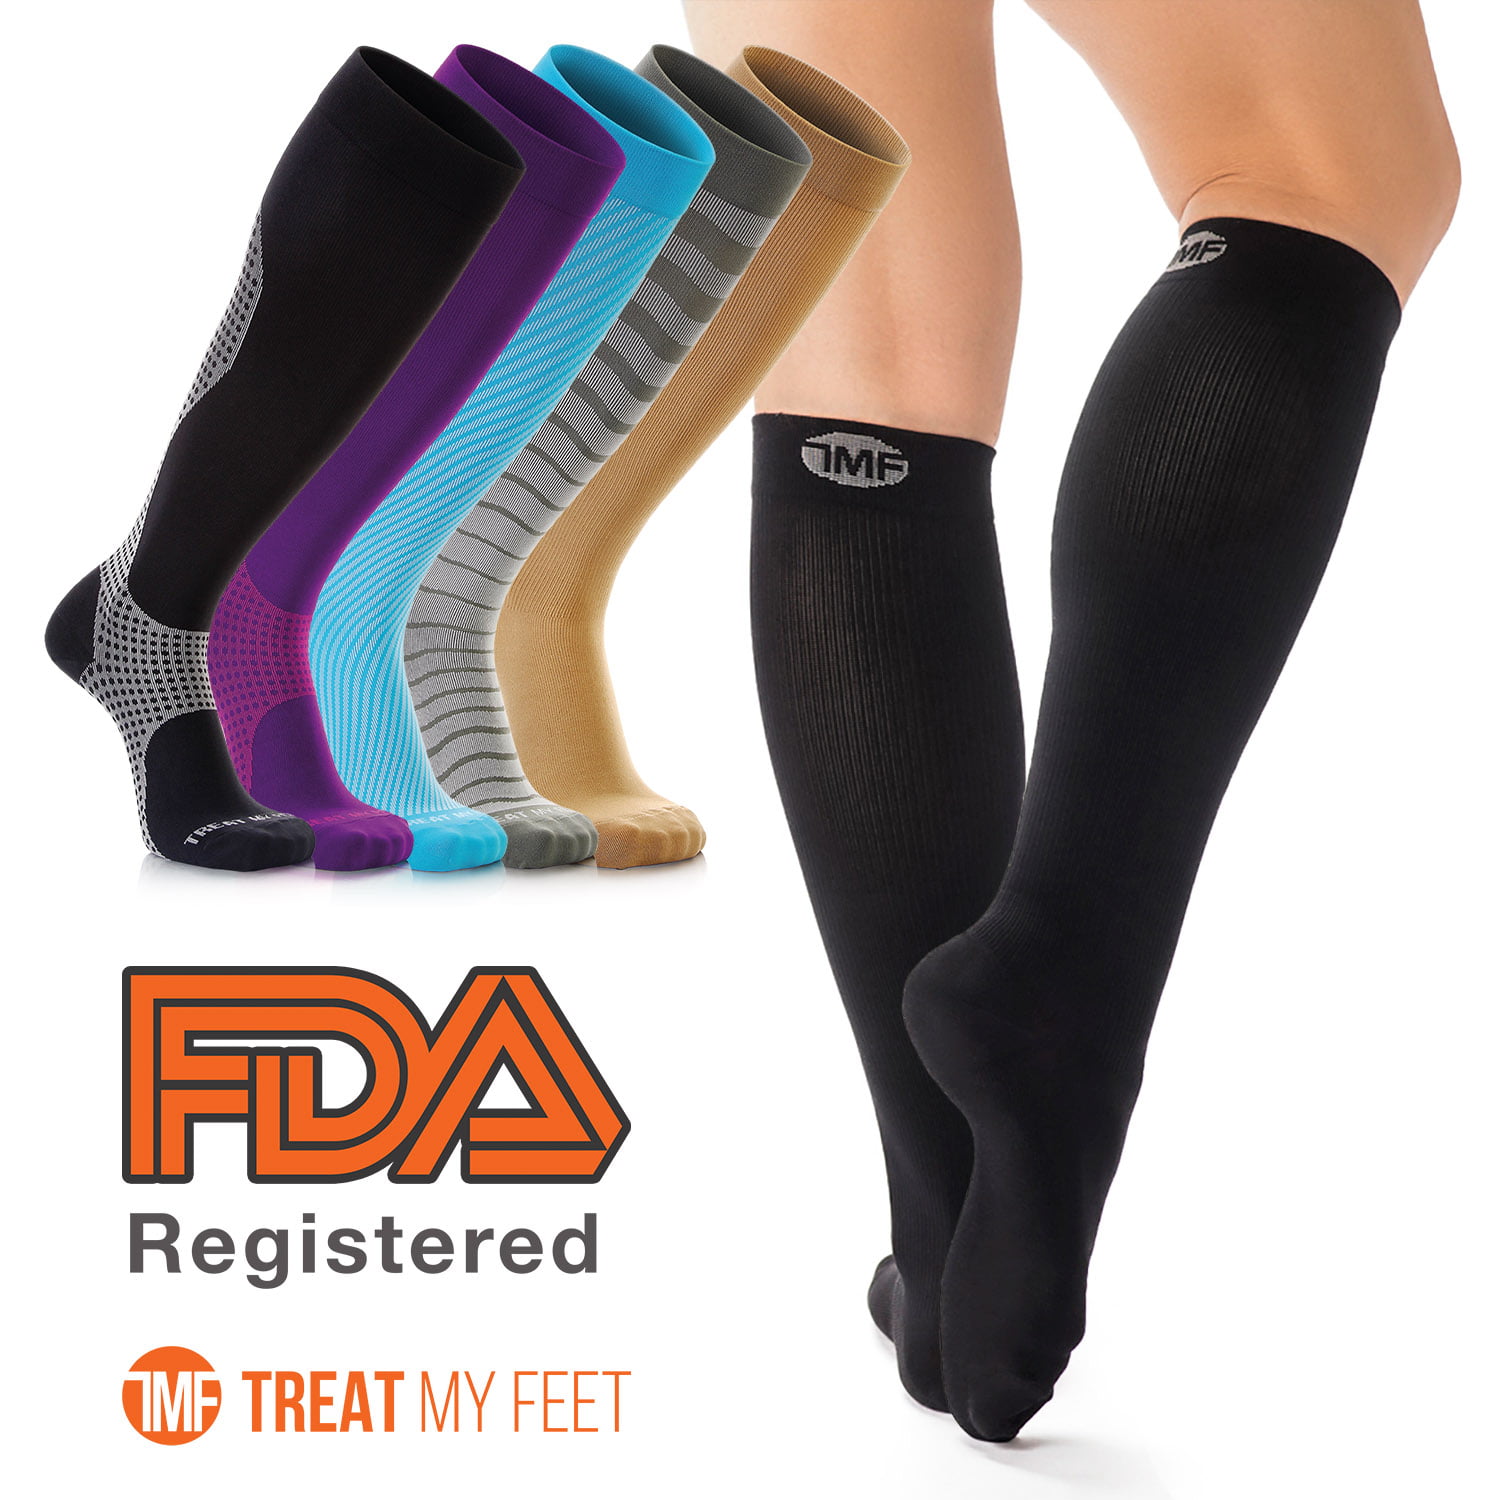 Men Womens Compression Socks Pain Relief Leg Foot Calf Support Stockings 